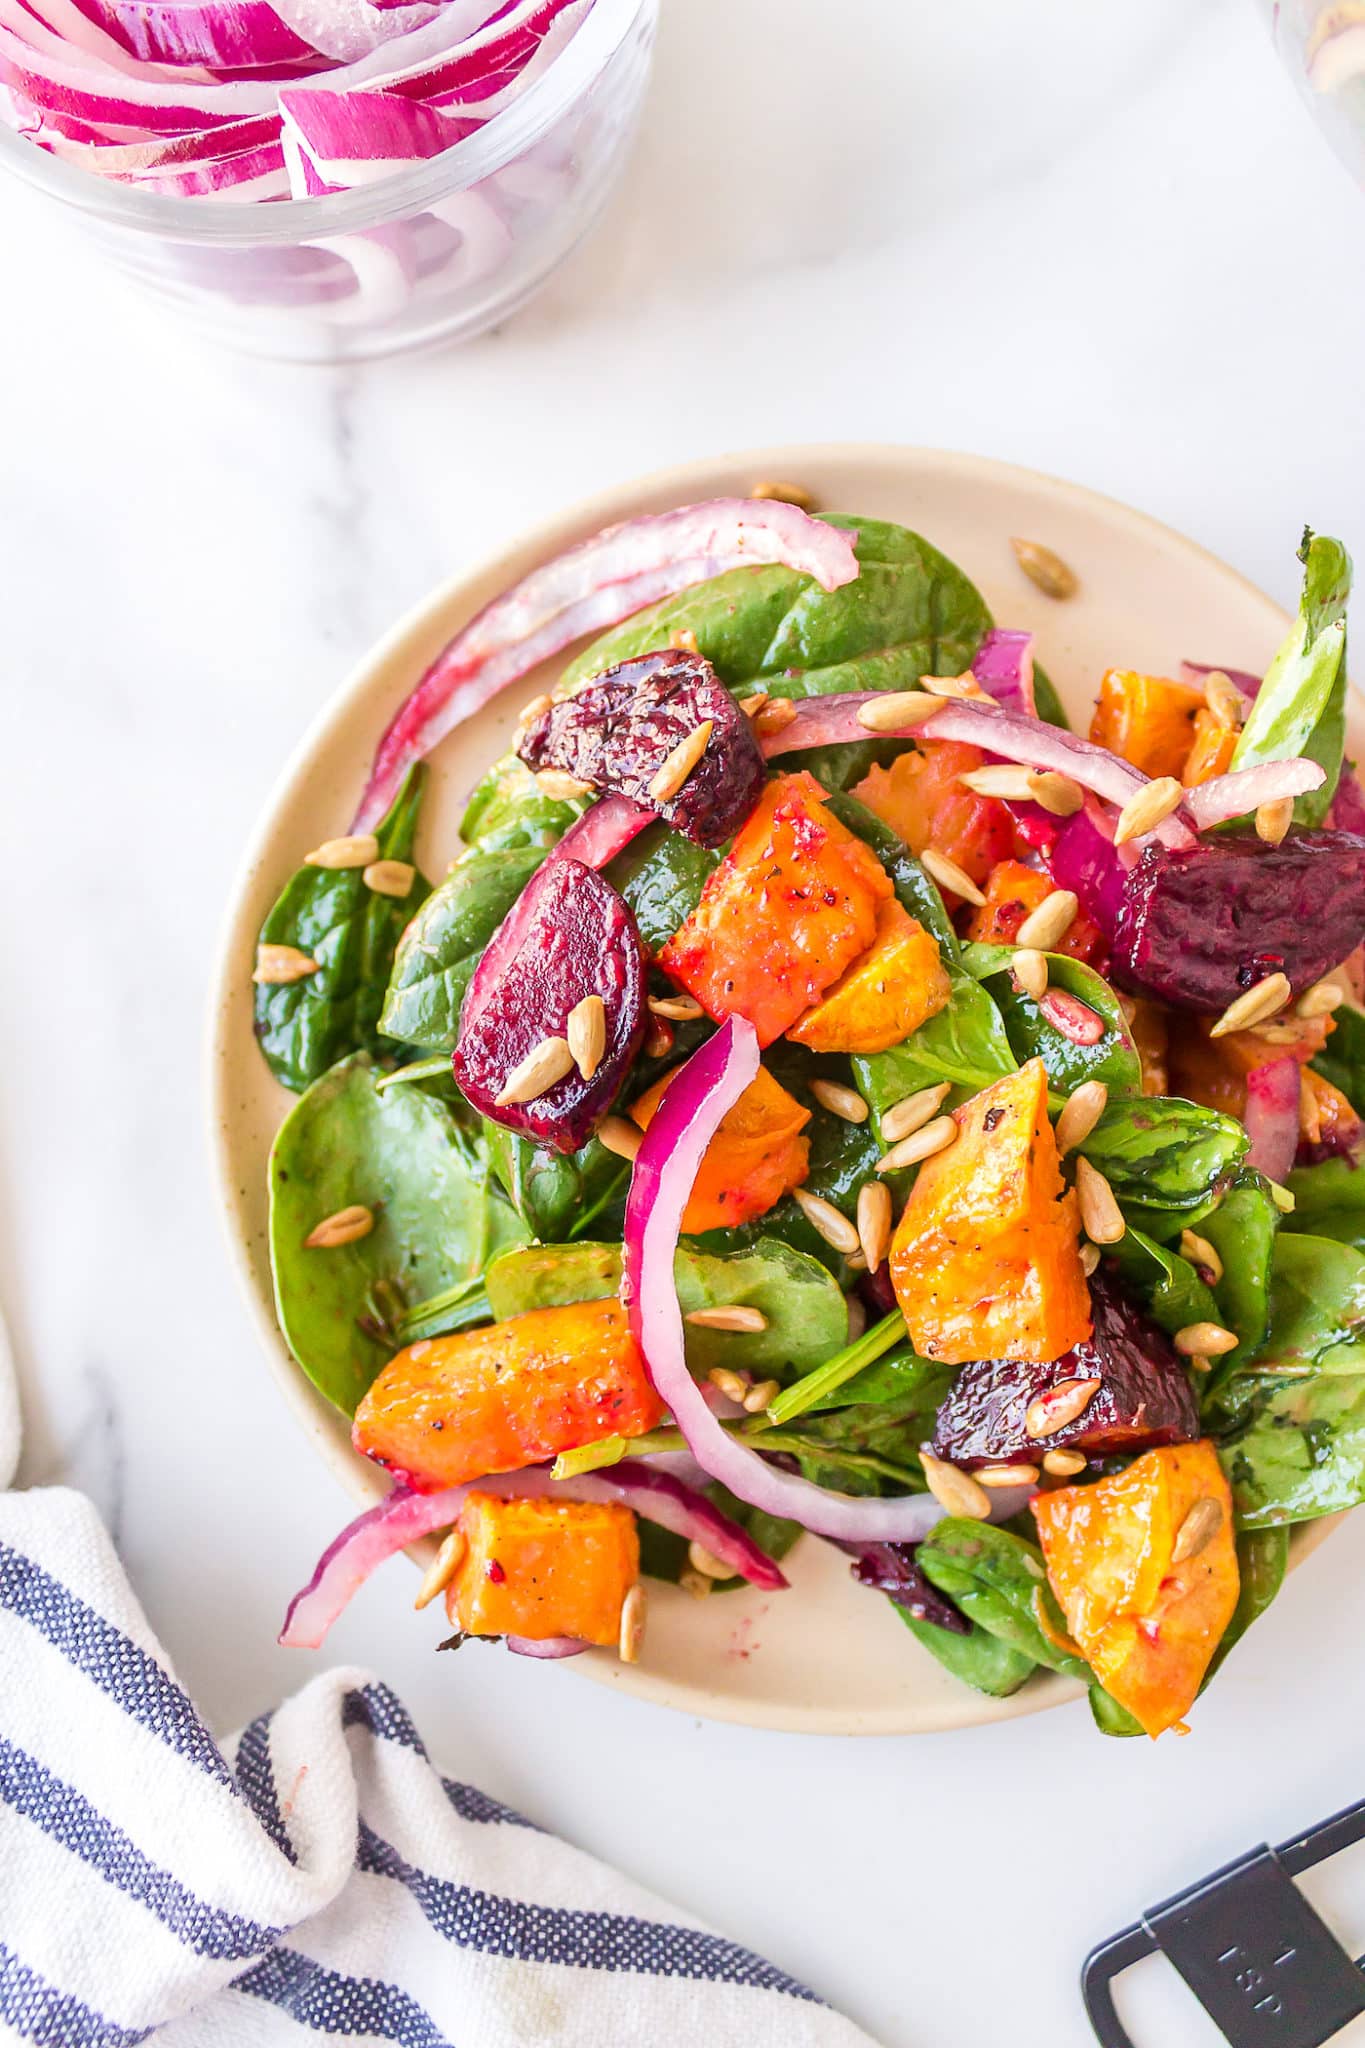 Close up of diced beets and sweet potatoes on a dressed spinach salad.